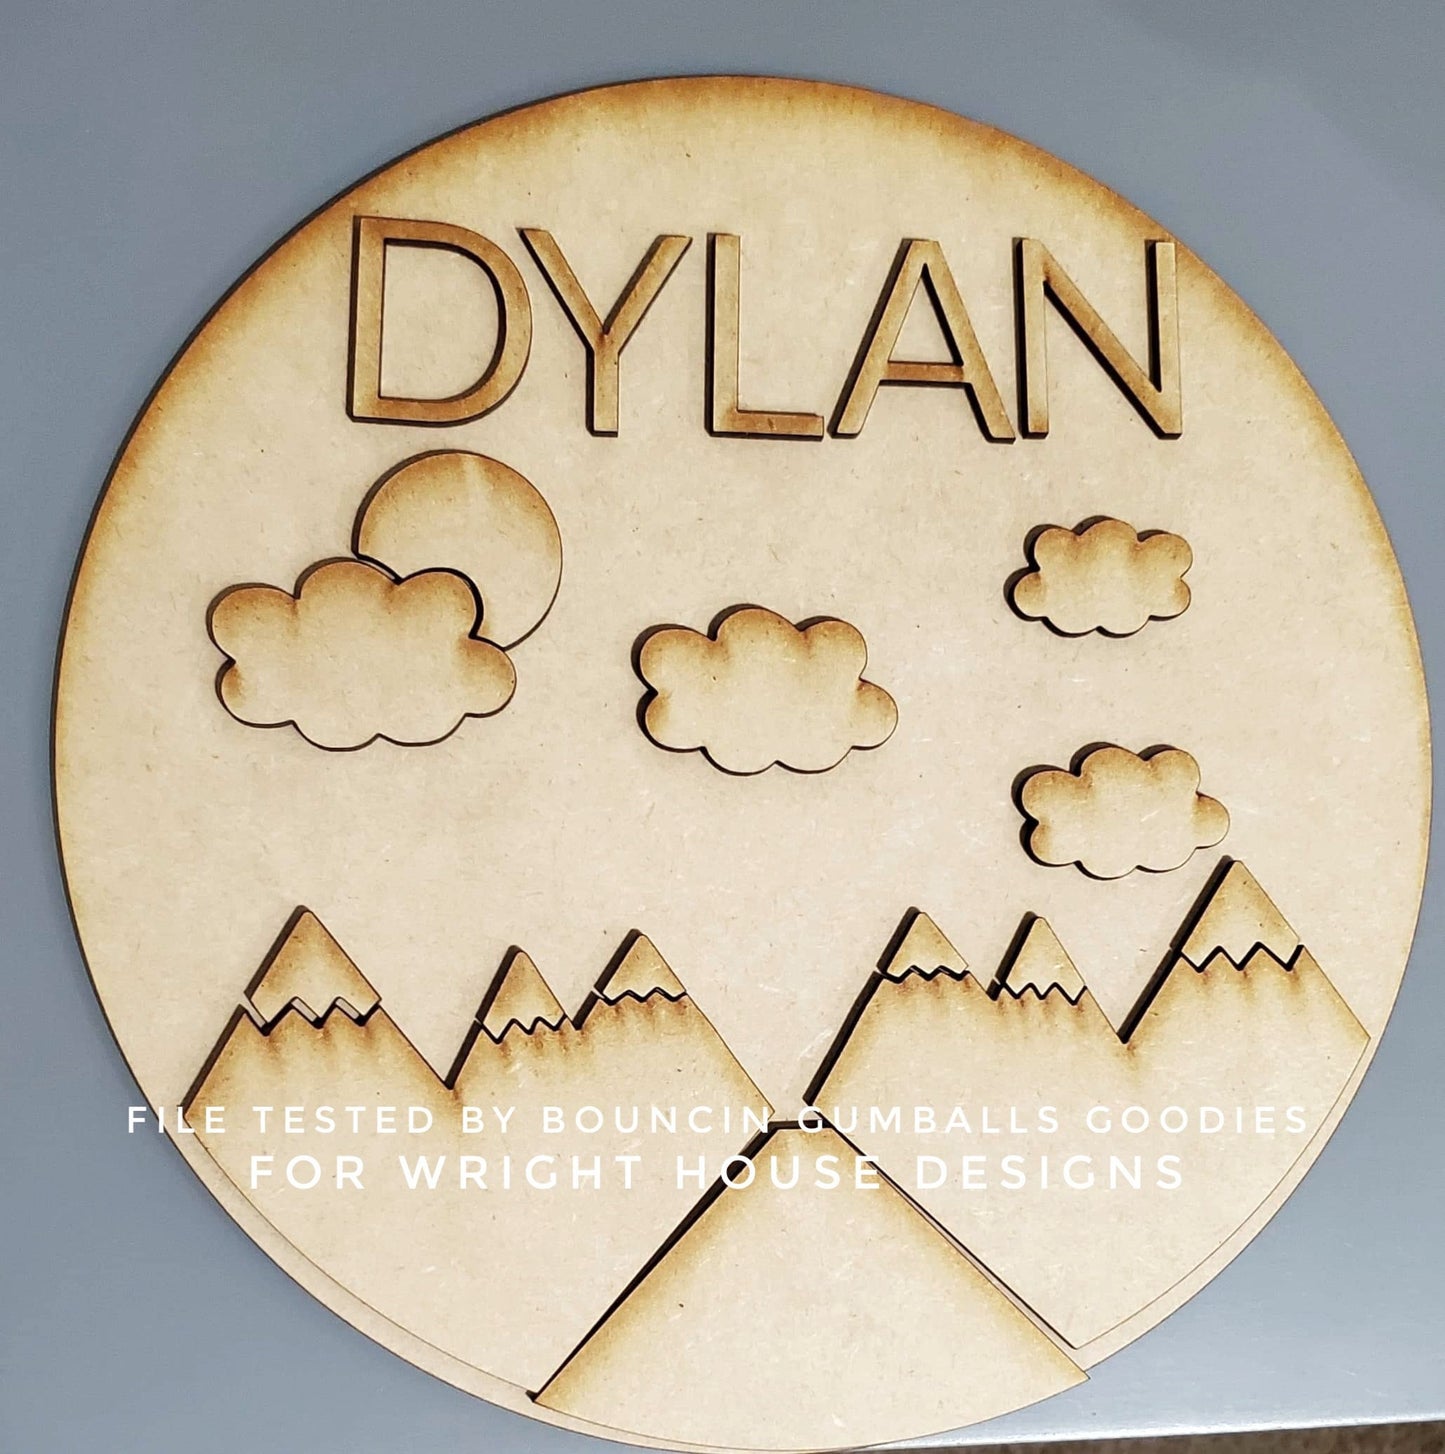 The Snowcap Mountain Baby Nursery Round - Sign Making Home Decor and DIY Kits - Cut File For Glowforge Lasers - Digital SVG File